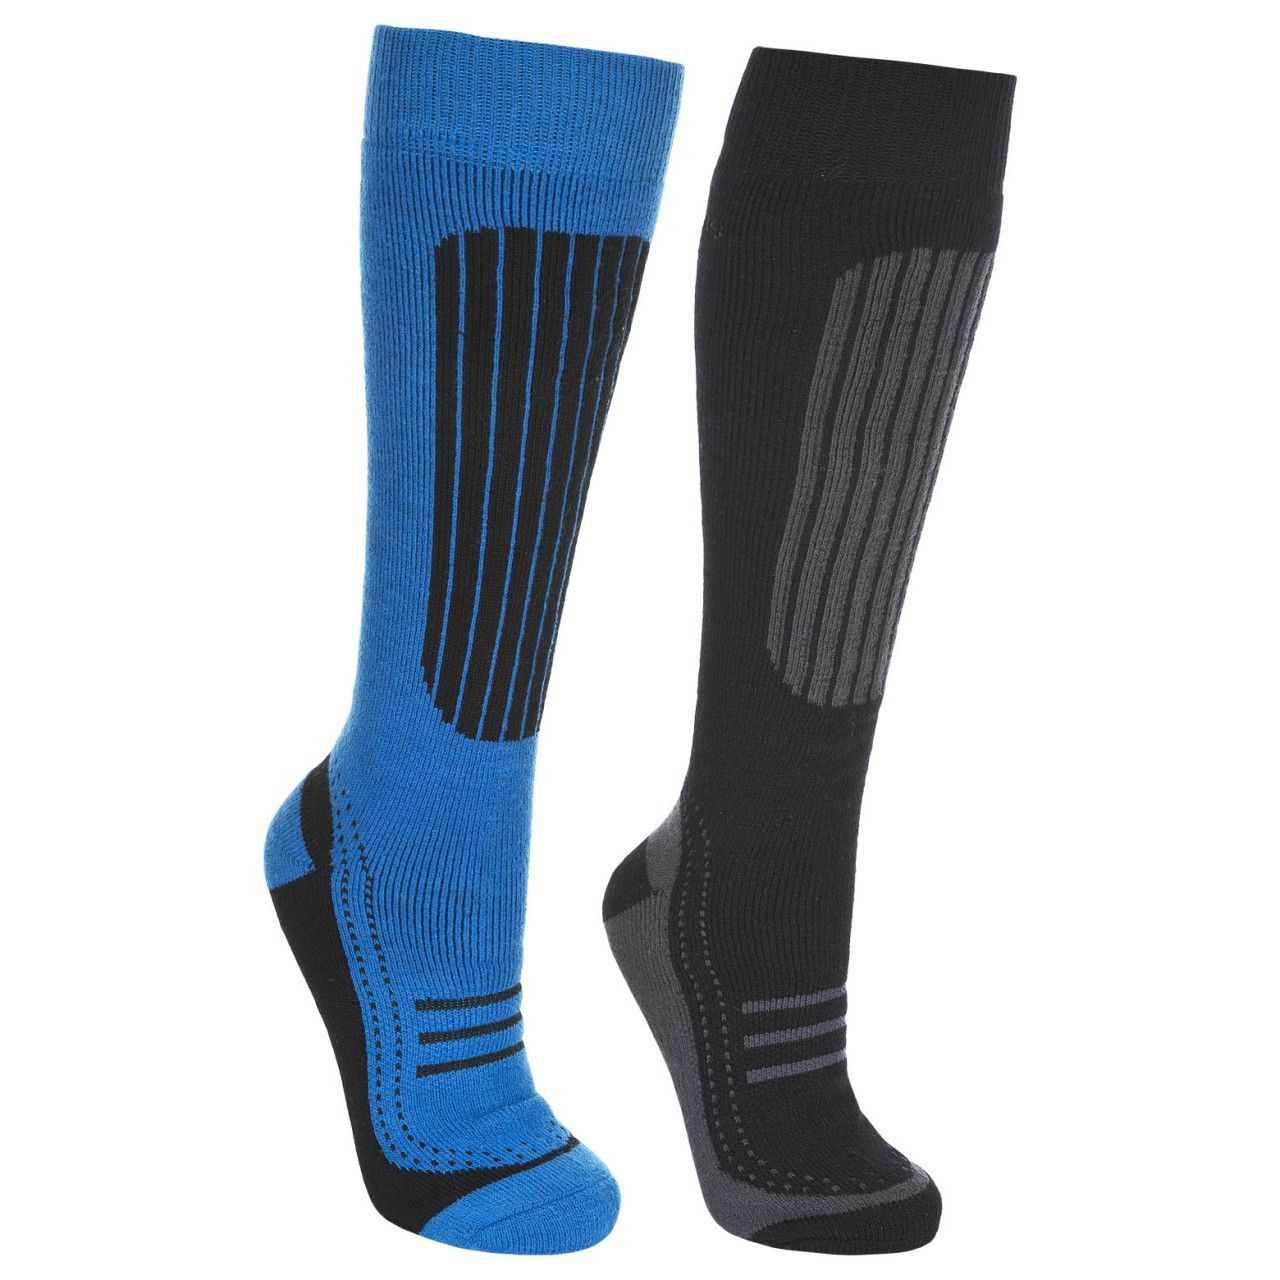 2 pair pack. Long length technical ski sock. Comfort fit. Arch support. Extra cushioning. 91% Acrylic, 8% Polyamide, 1% Elastane.